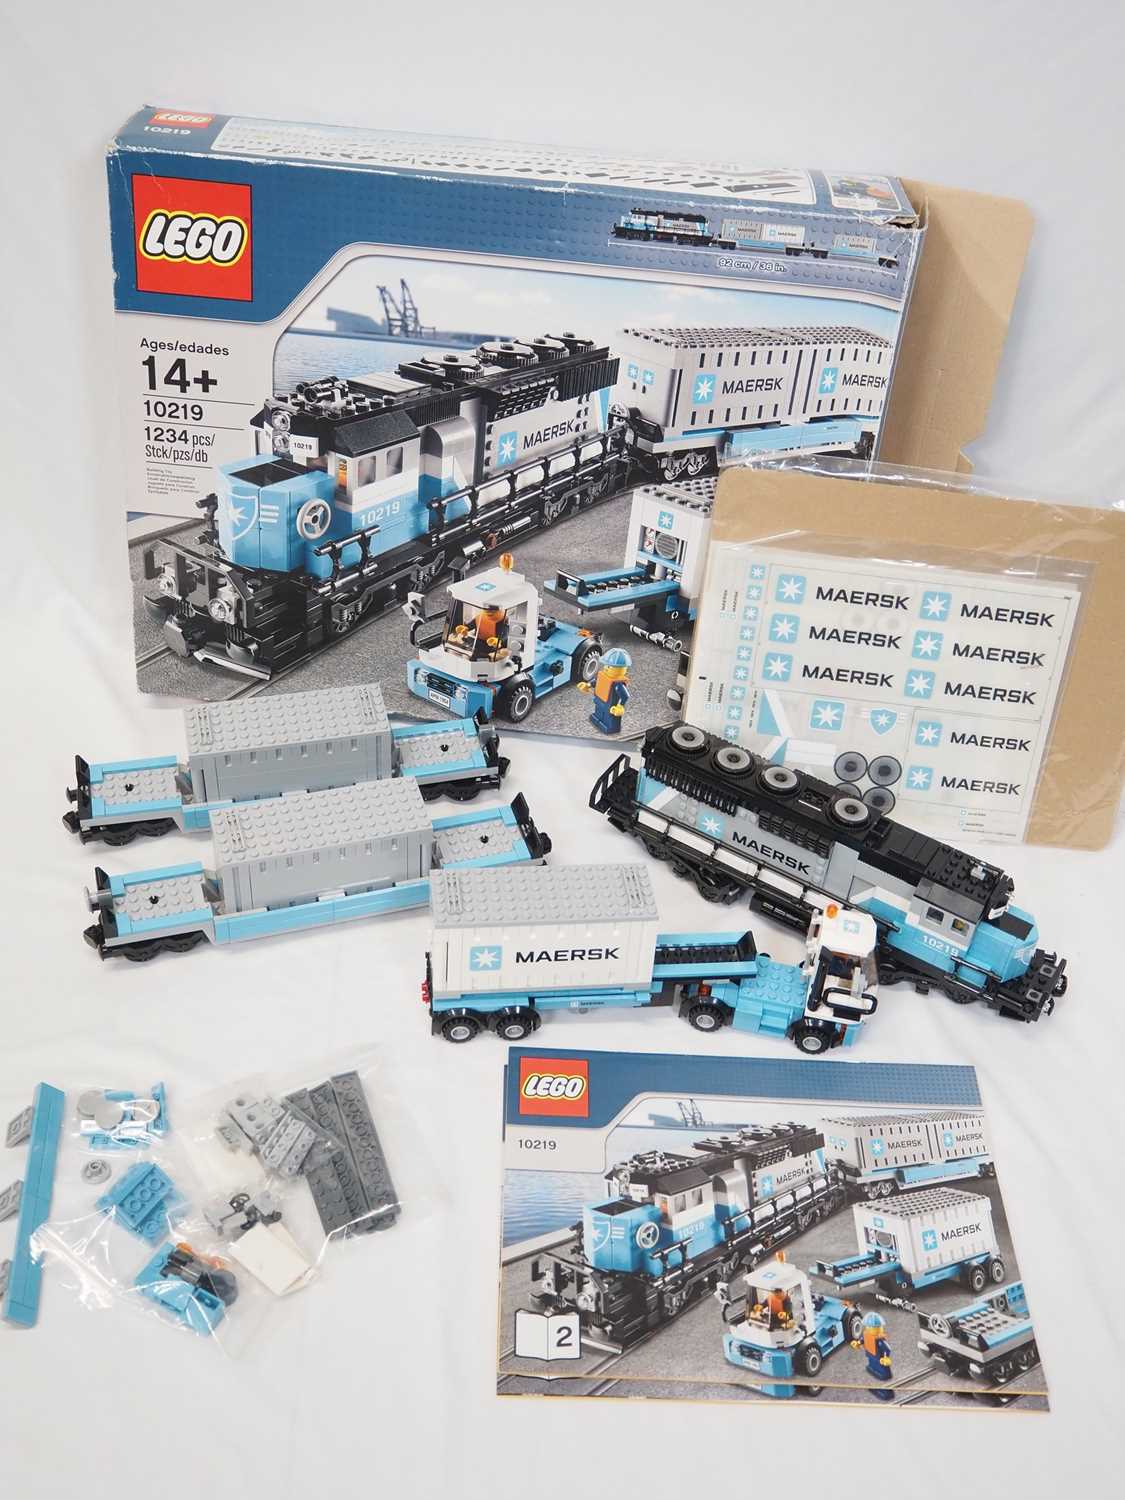 LEGO - TRAIN #10219 RC Train - Maersk Container Train - appears complete, no instructions, boxed